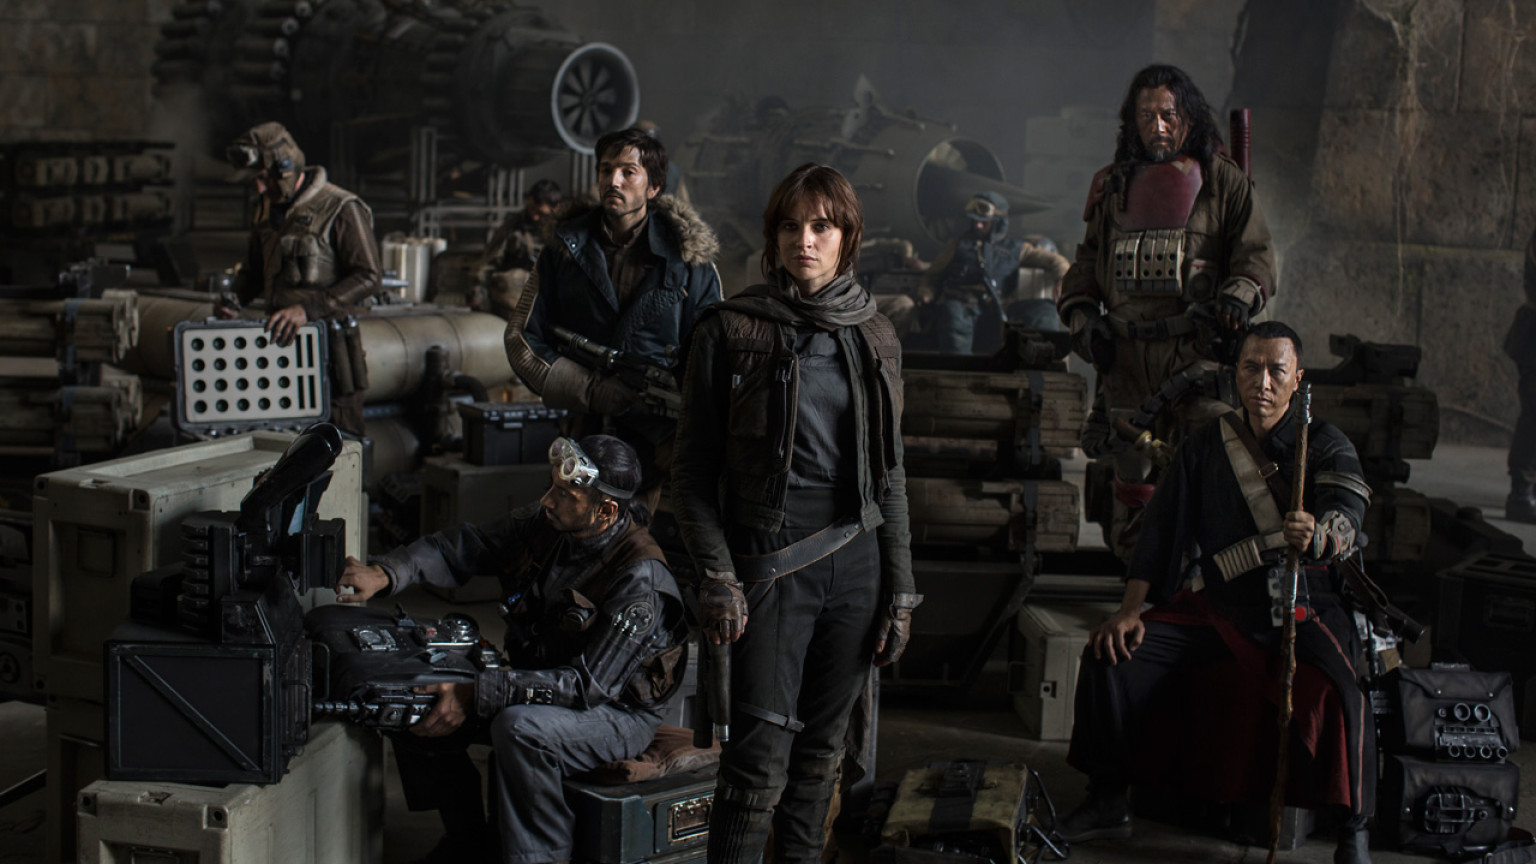 rogue one - Star Wars Rogue One : nouvelle bande-annonce ROGUE ONE